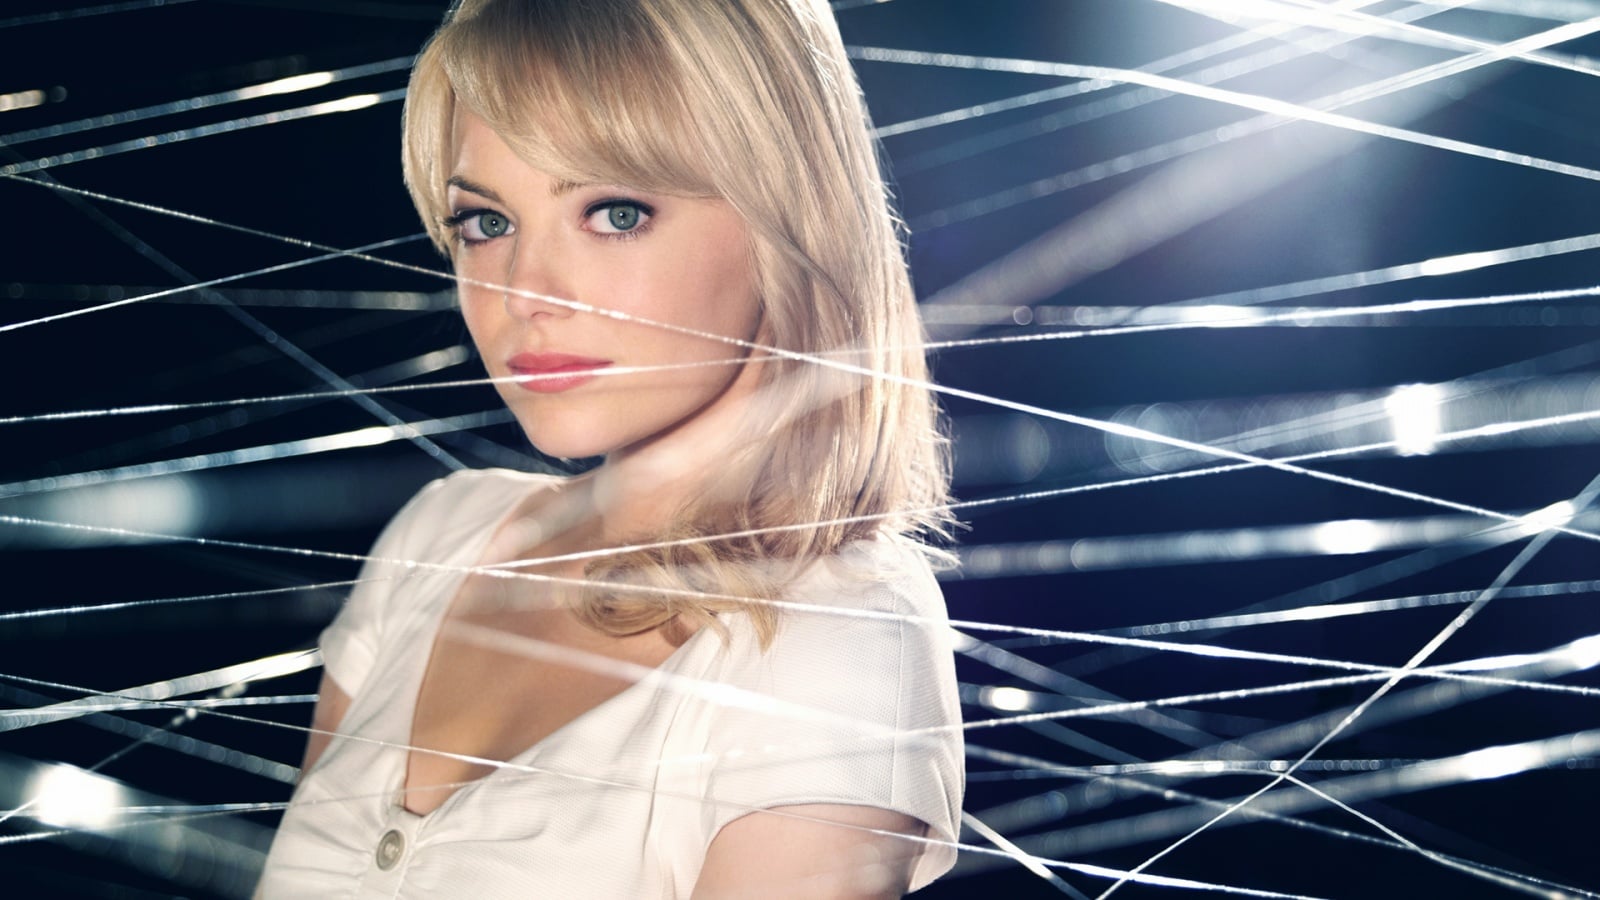 gwen stacy